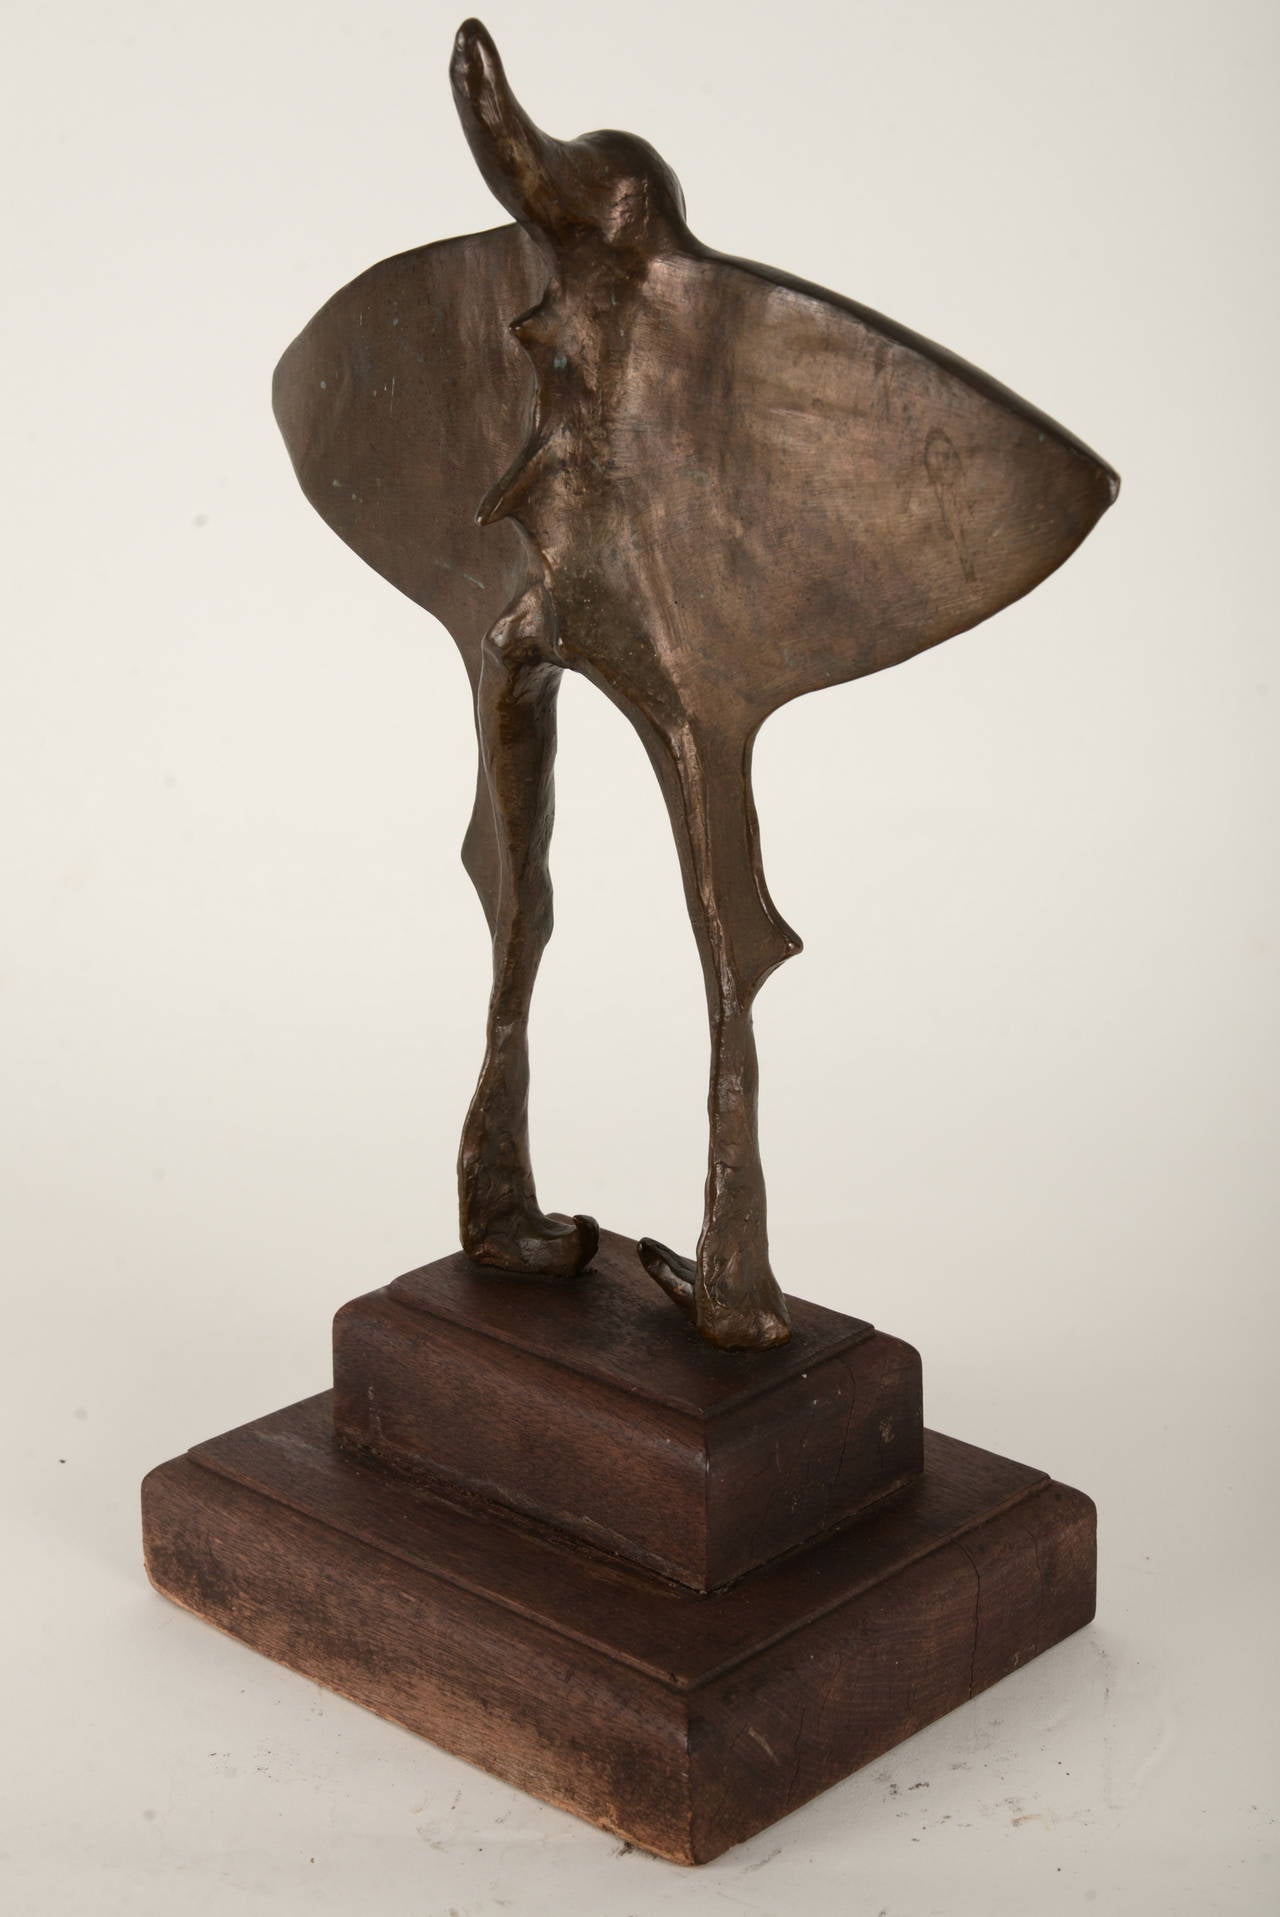 Bronze casting mounted on a two-tiered wooden base. The faceless figure is a stylized female form suggesting wings, exaggerated spine and inward turned feet. This is a pretty awesome piece but it's not suggested as a mother's day gift.